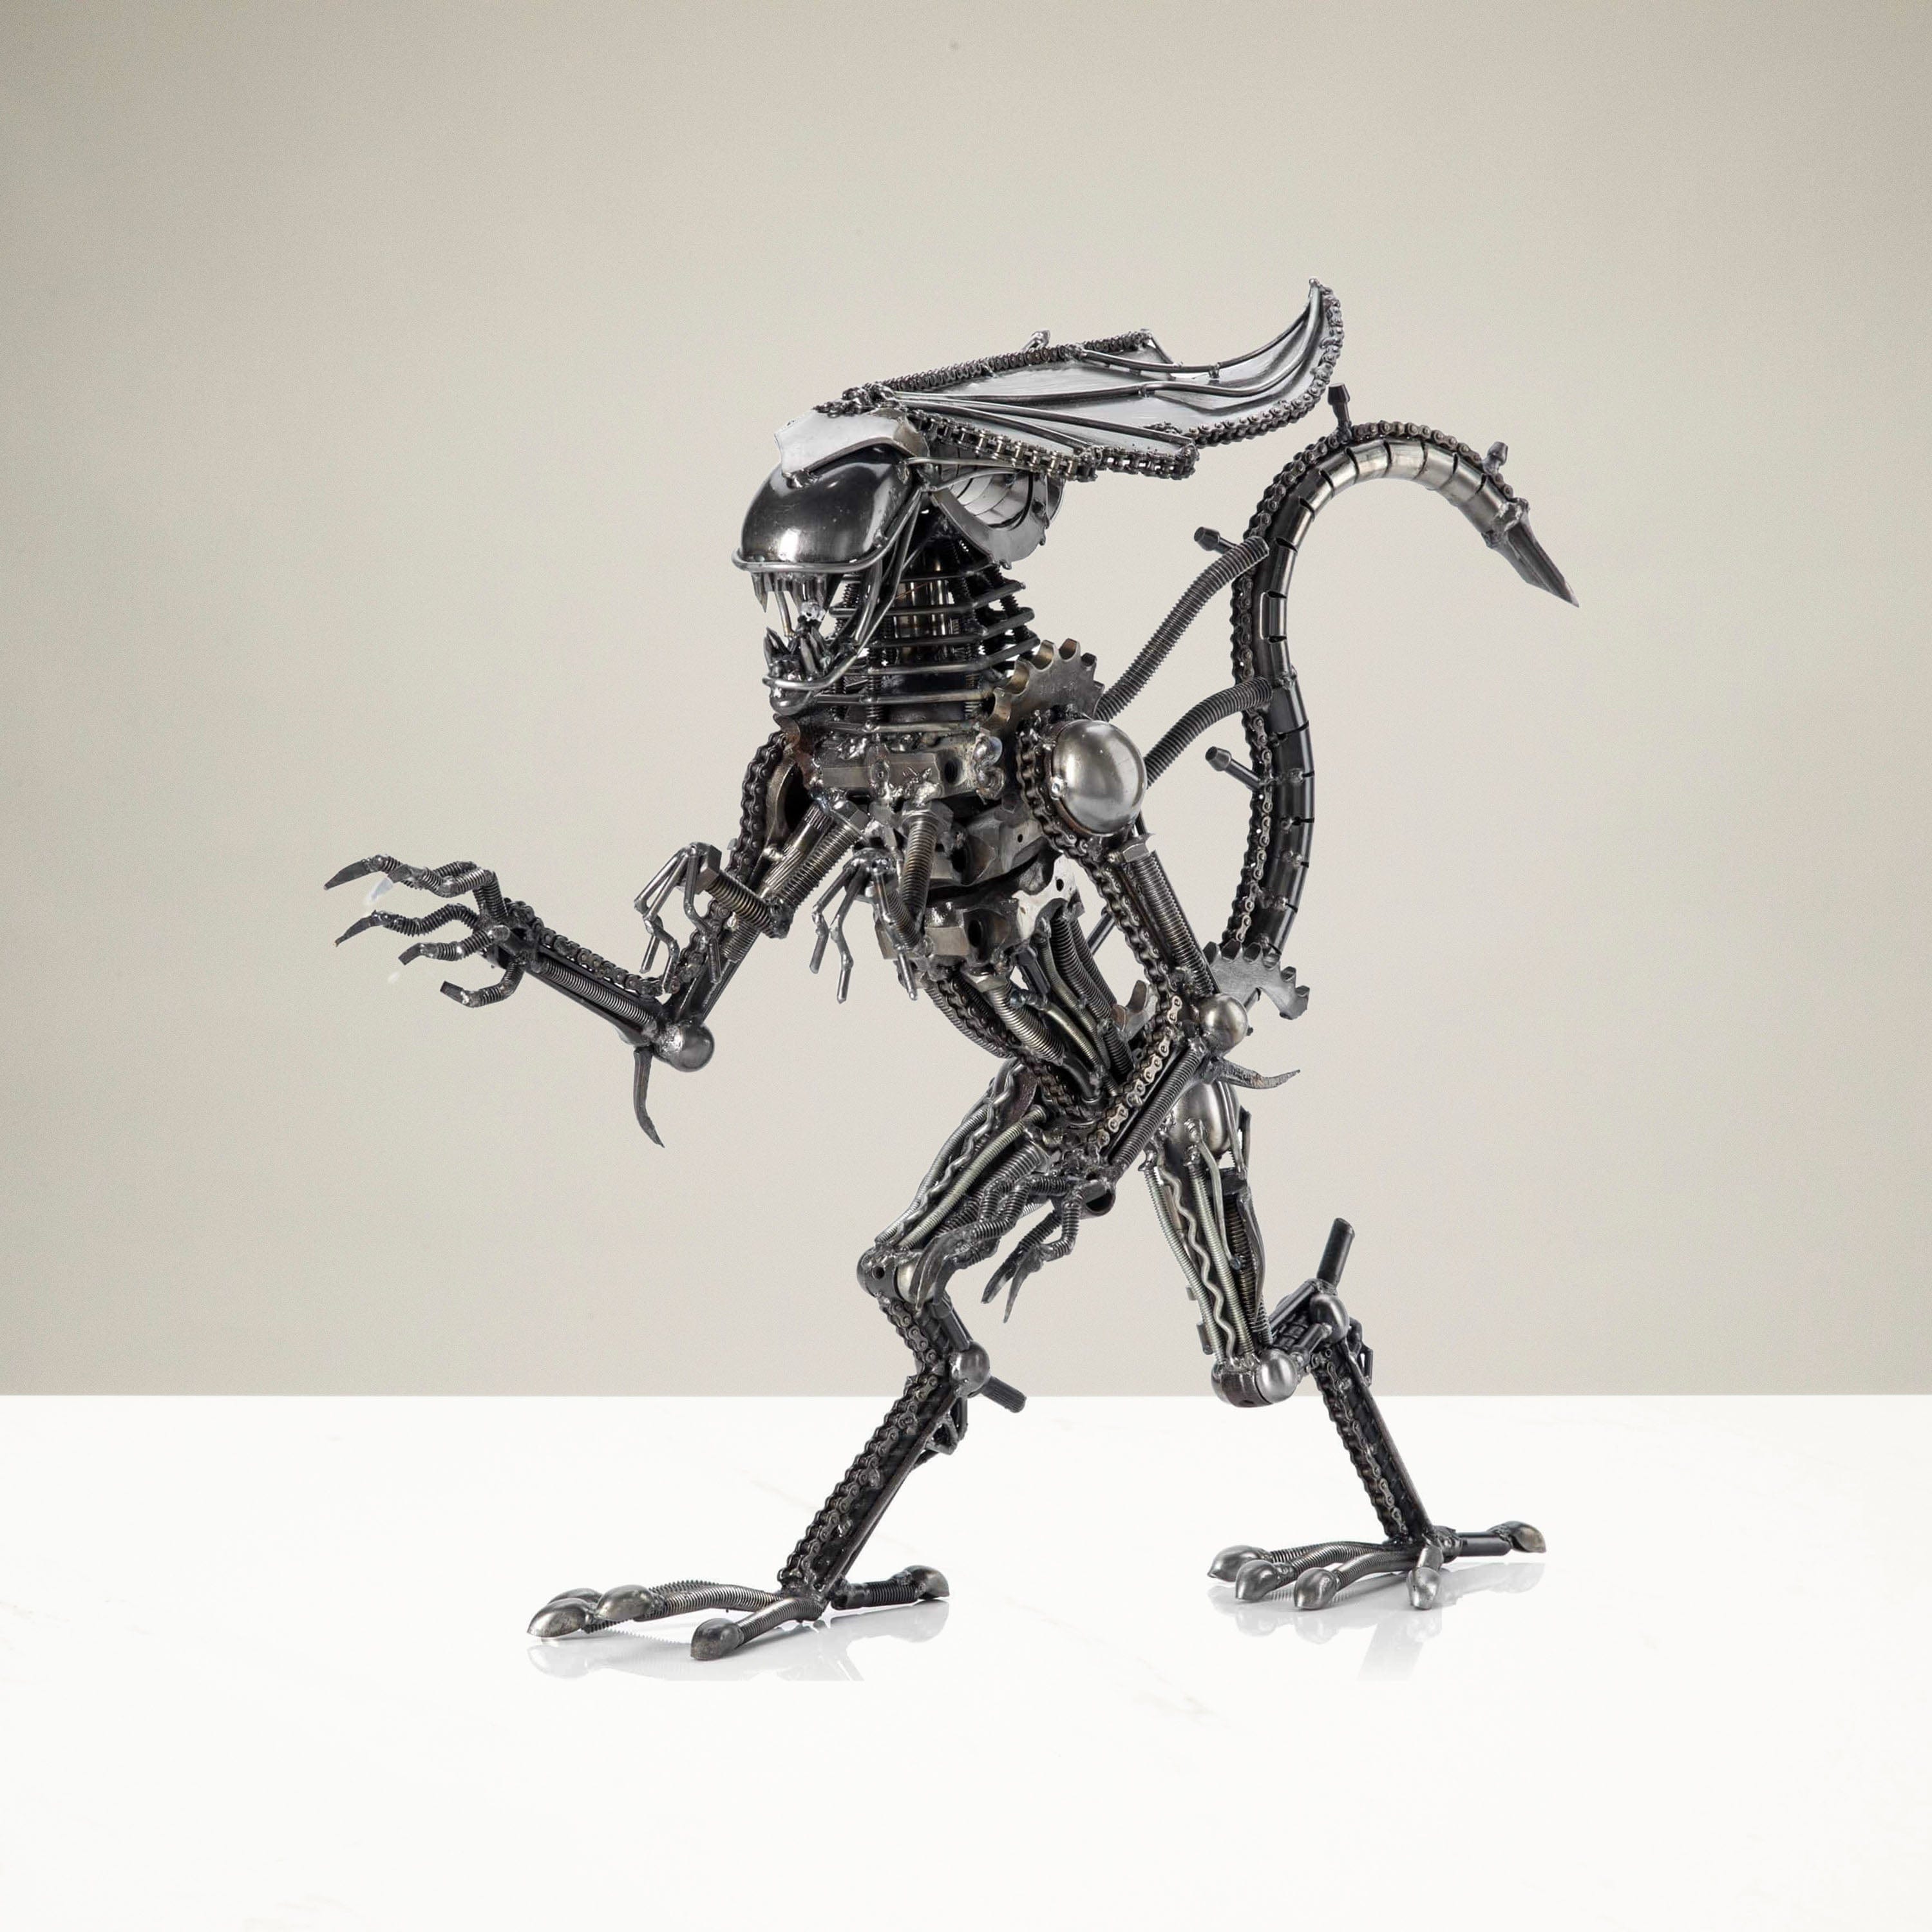 Kalifano Recycled Metal Art 18" Queen Alien Inspired Recycled Metal Sculpture RMS-QA45x40-S